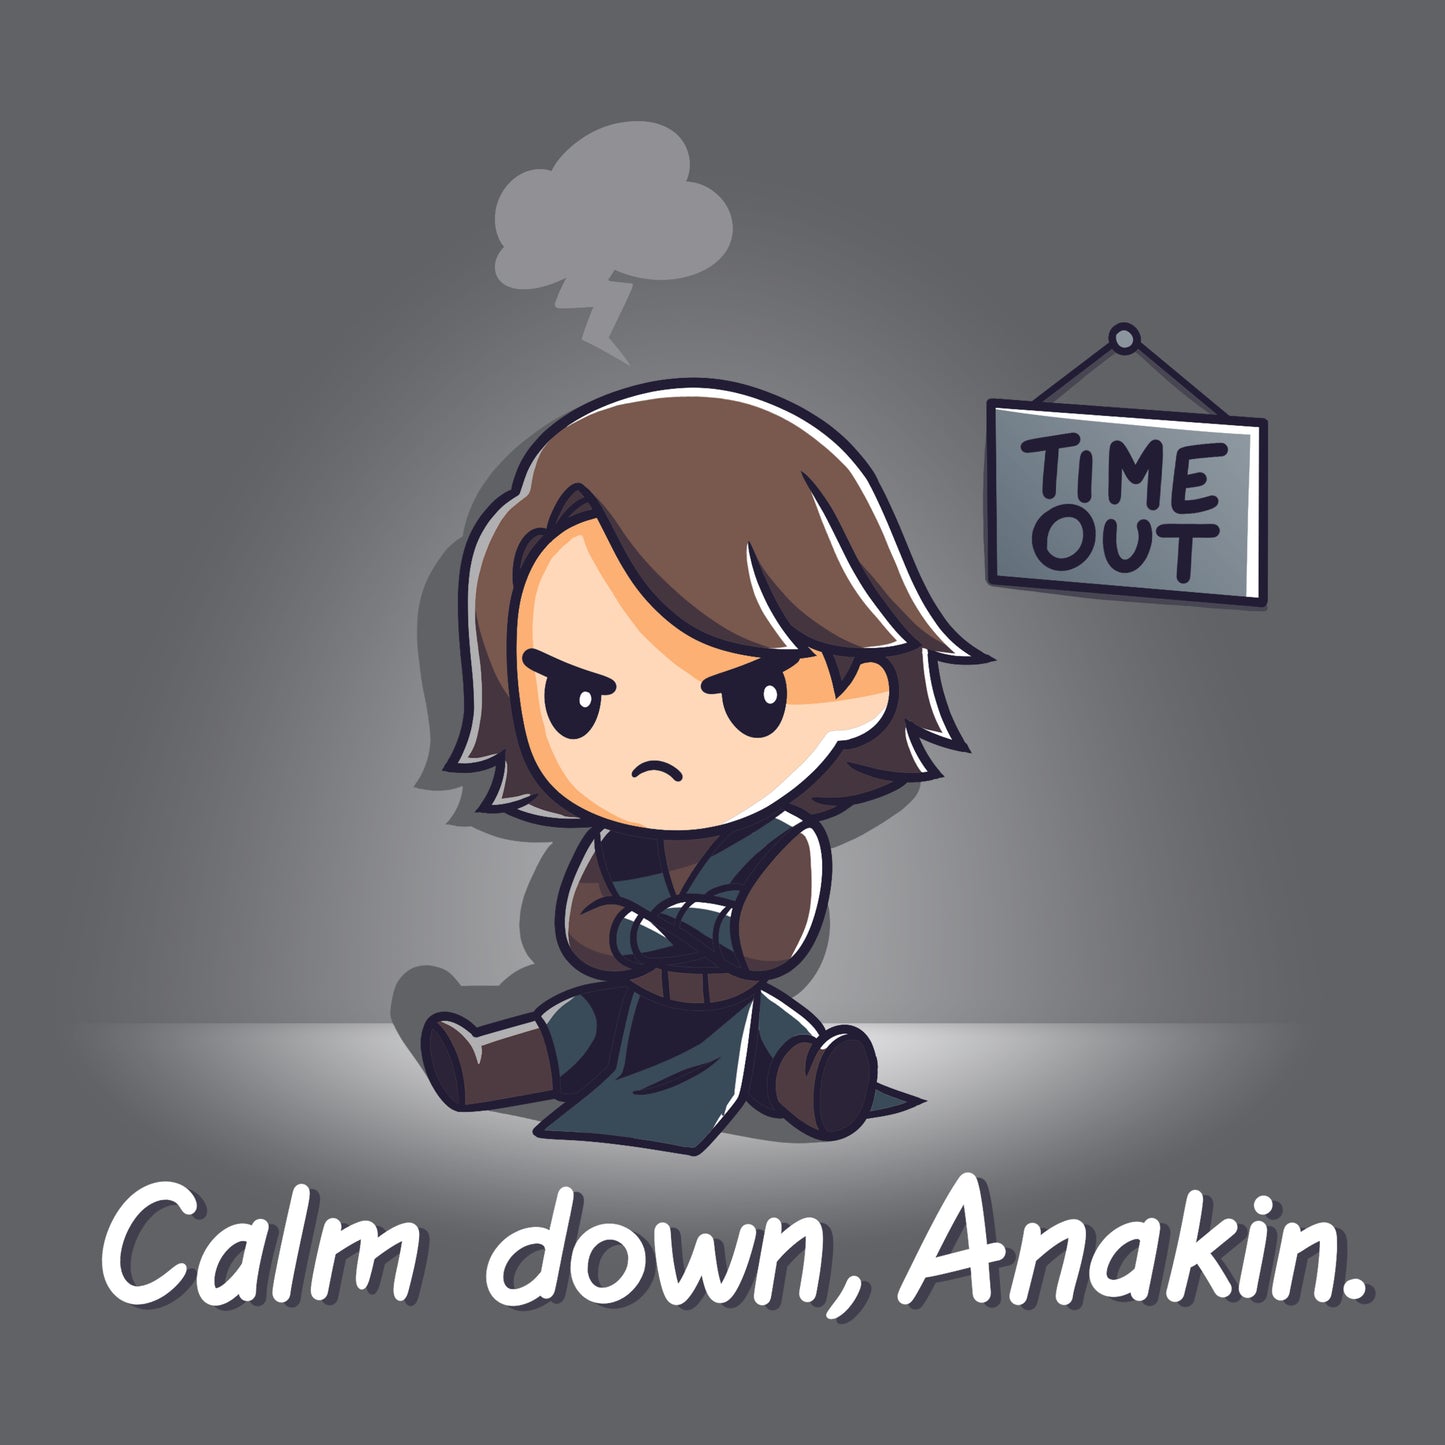 Officially licensed Star Wars Jedi training tee for Calm down, Anakin.